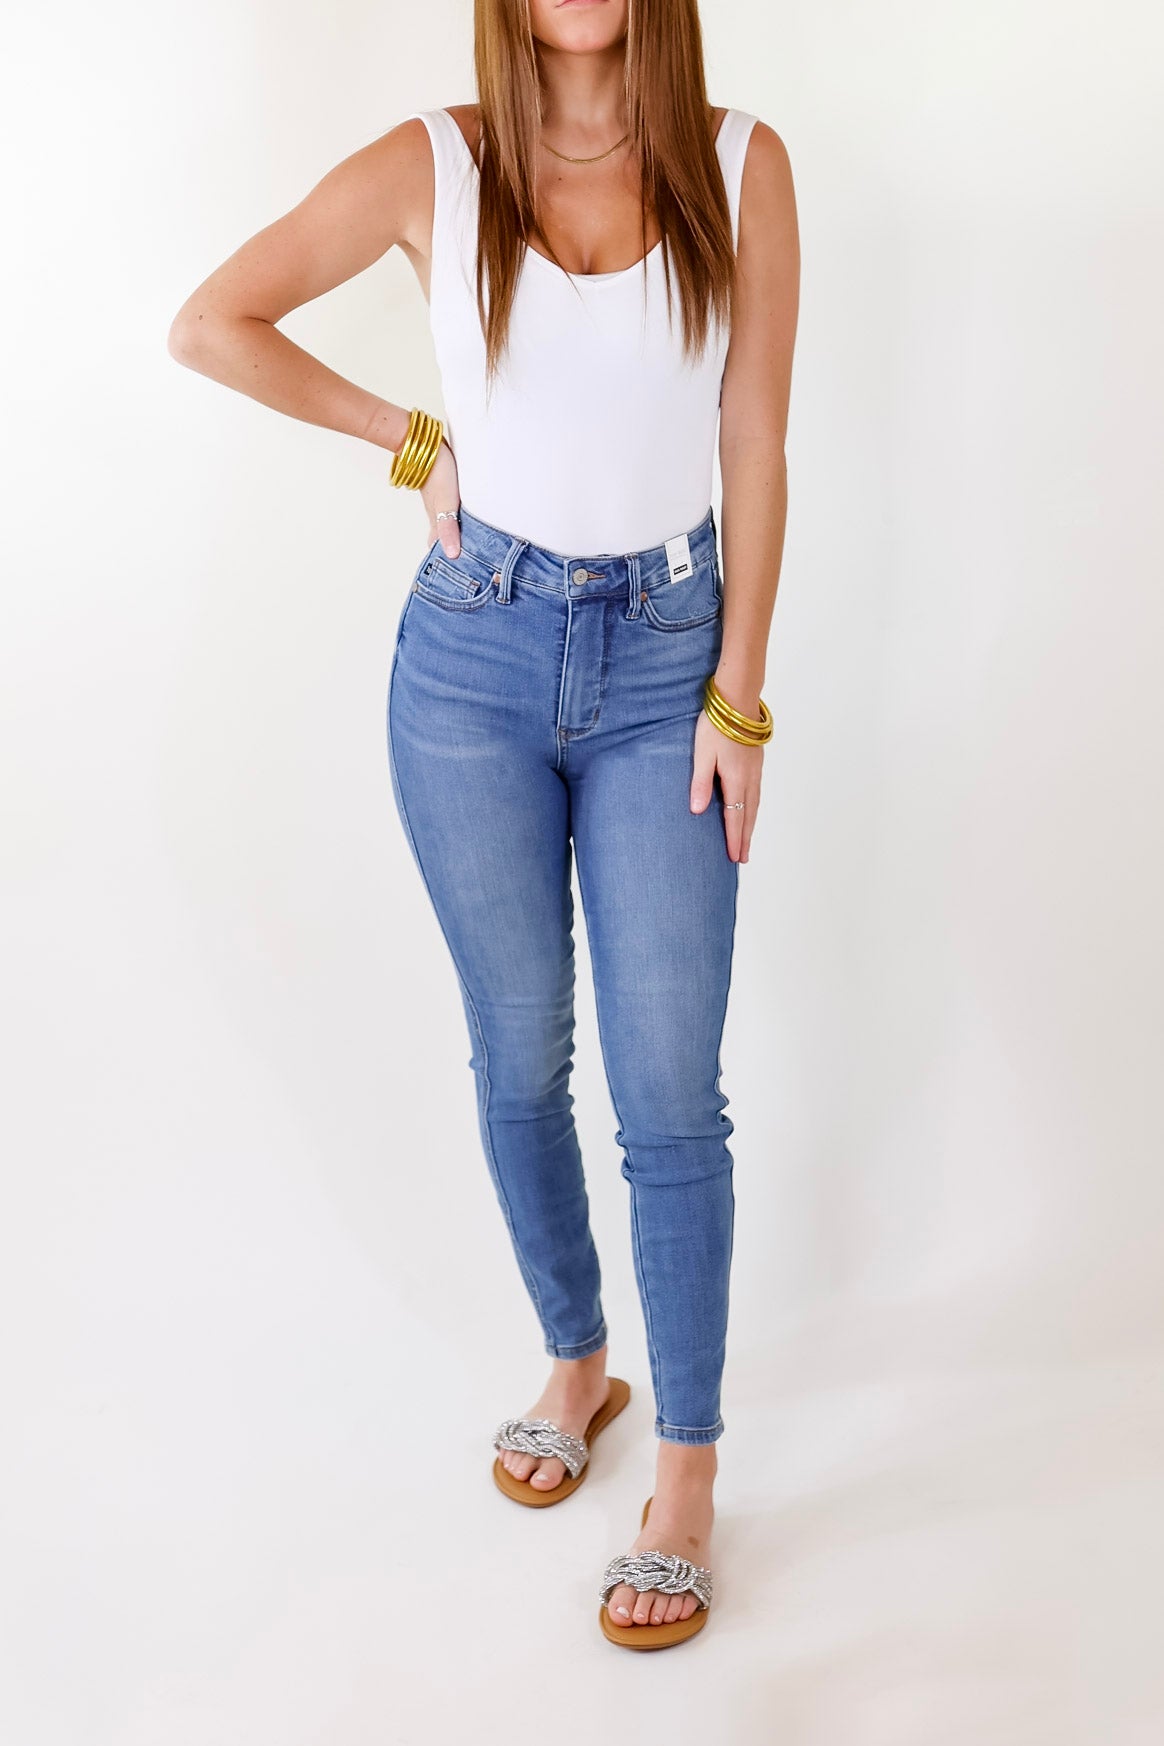 Judy Blue | Hopeful Dreamer Control Top Skinny Jeans in Medium Wash - Giddy Up Glamour Boutique